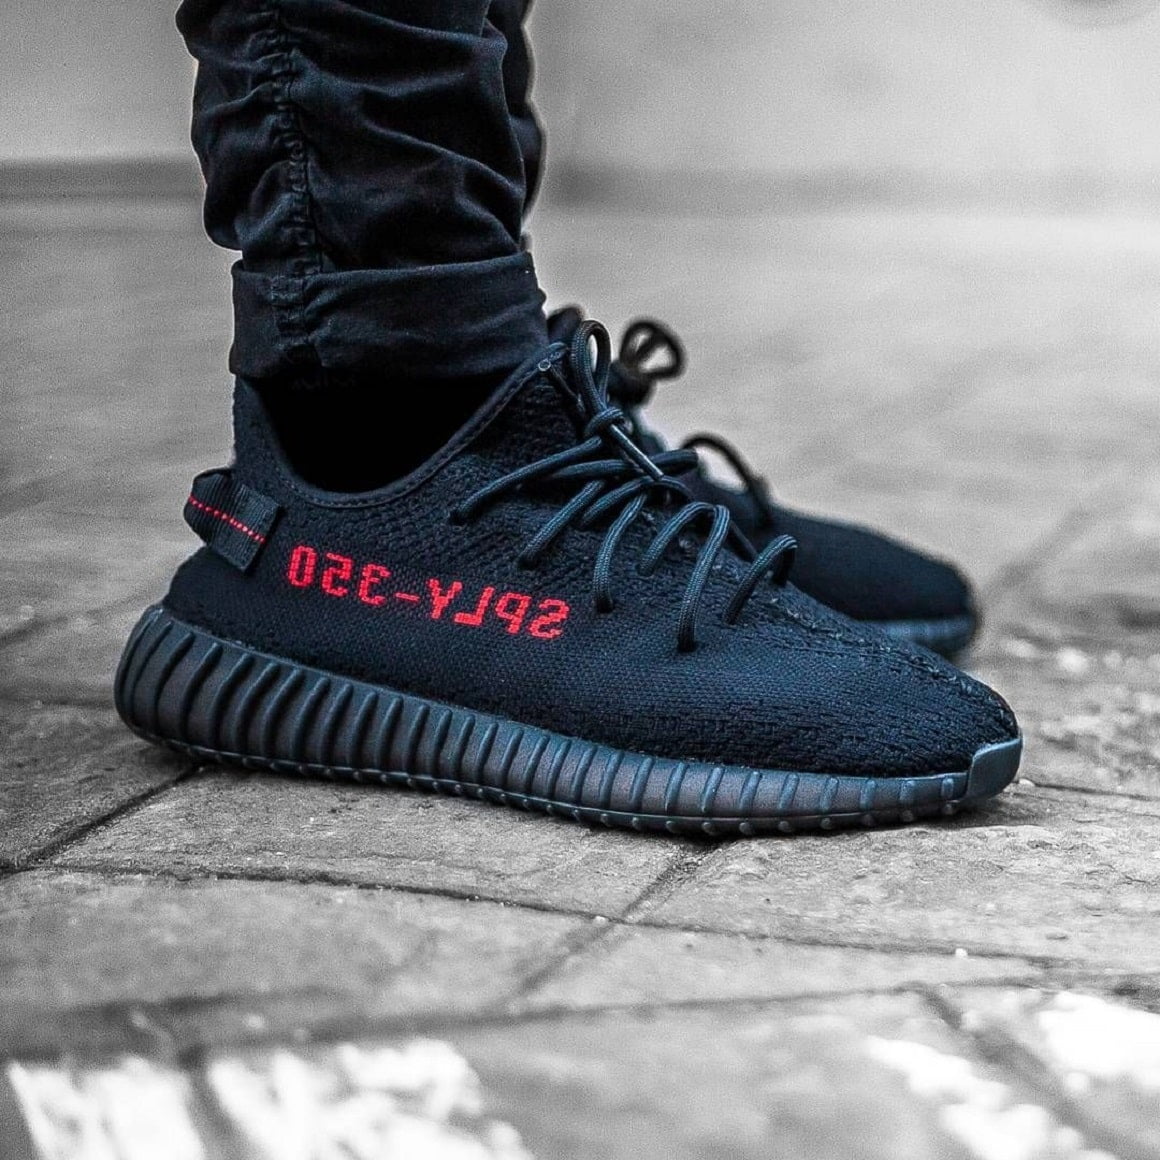 yeezy boost bred